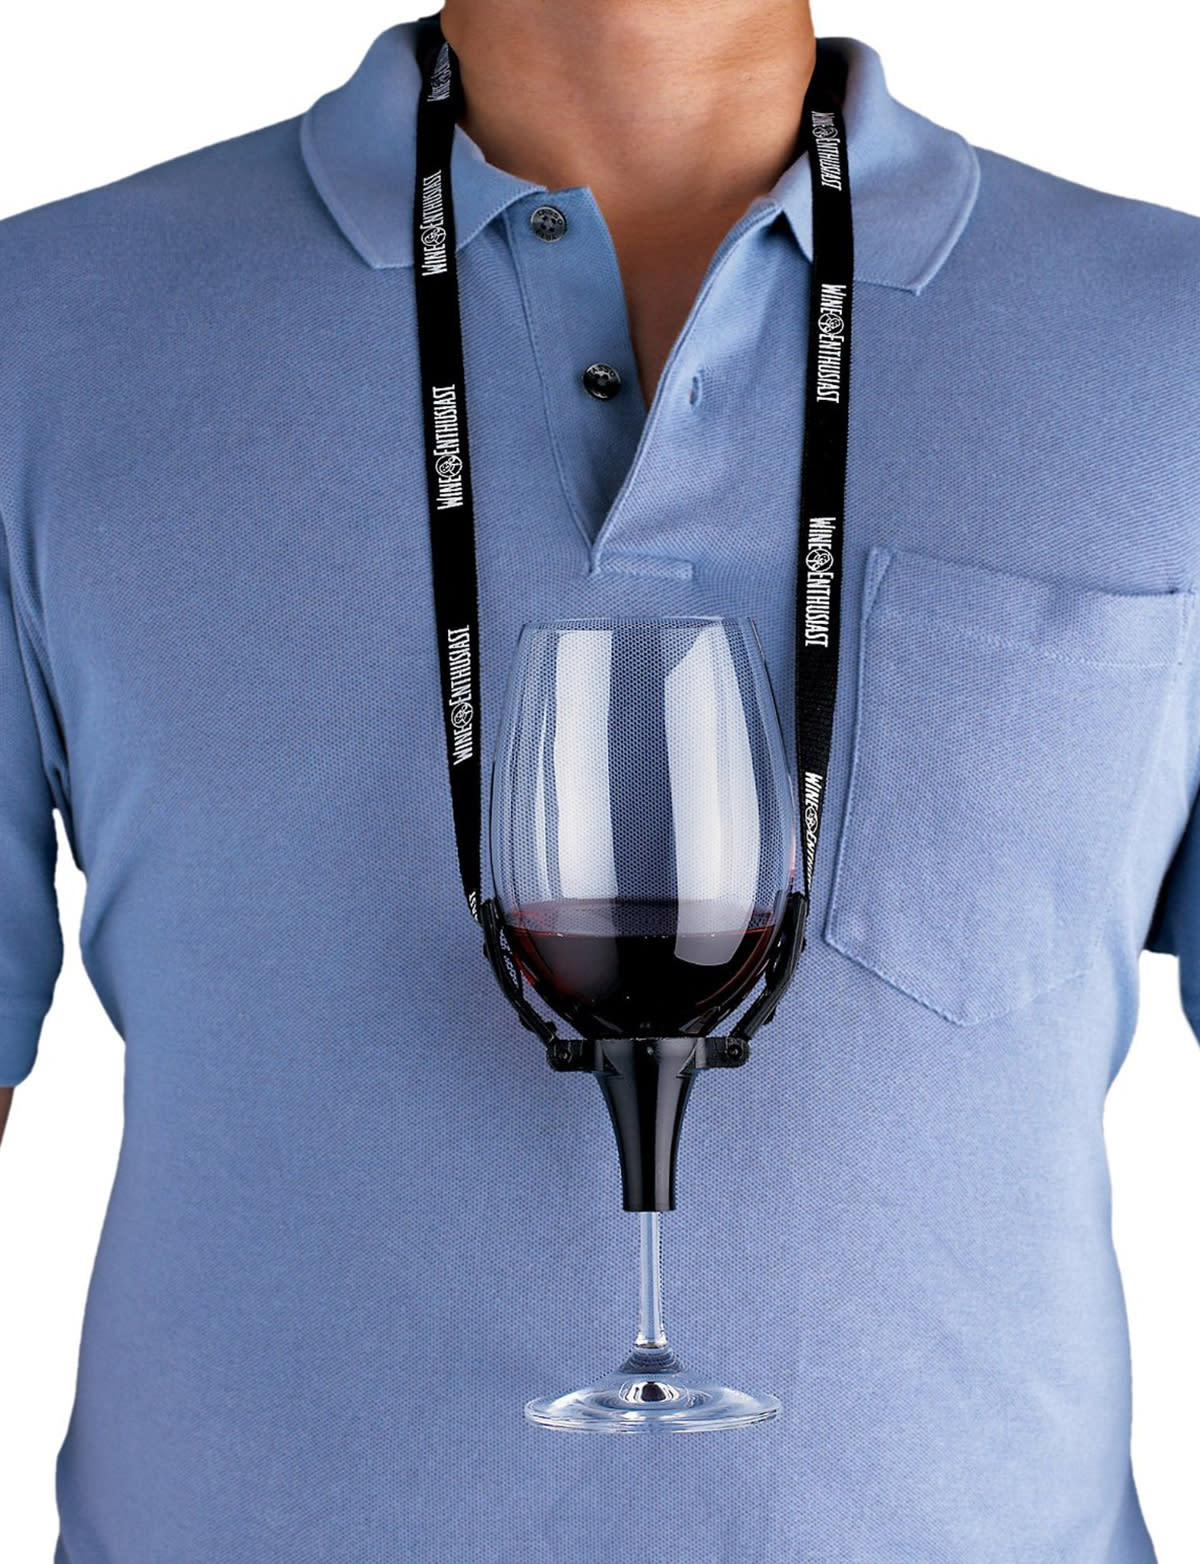 Style & Colour Choice Hang your wine glass round your neck WINE GLASS LANYARD 